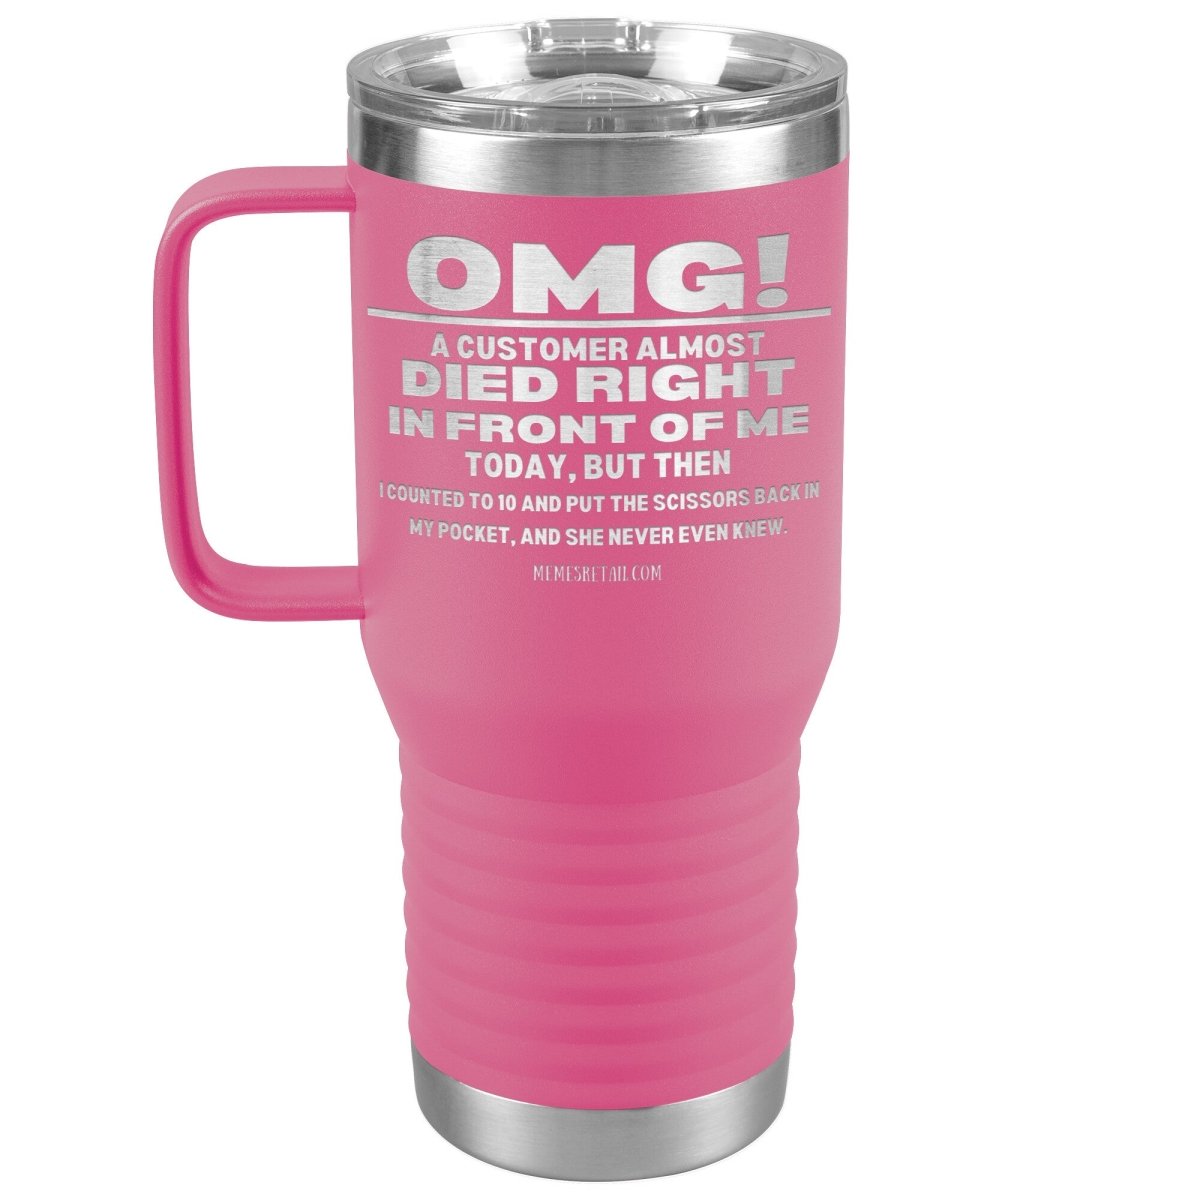 OMG! A Customer Almost Died Right In Front Of Me Tumbler, 20oz Travel Tumbler / Pink - MemesRetail.com